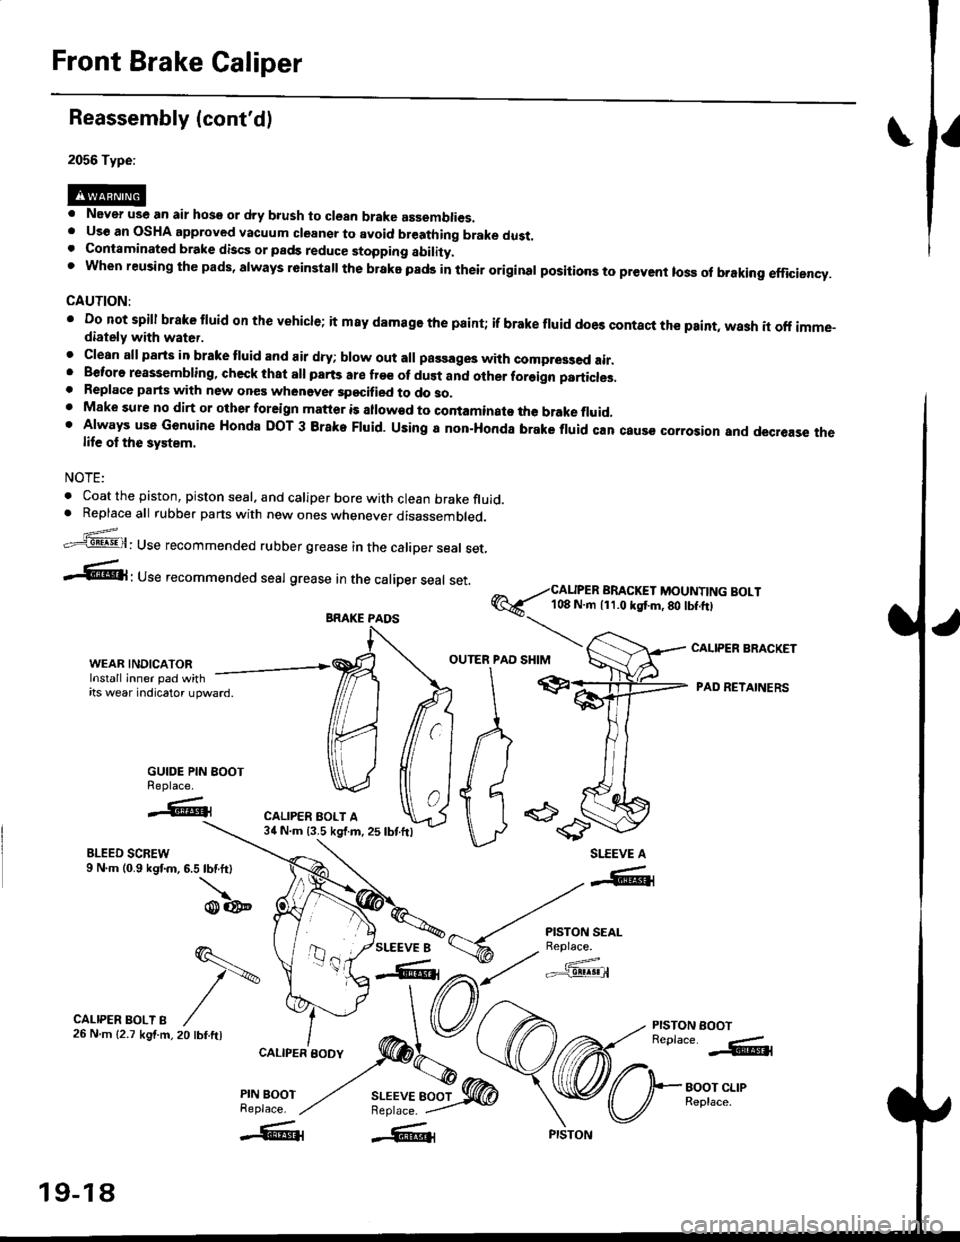 HONDA CIVIC 1999 6.G User Guide Front Brake Caliper
Reassembly (contd)
2056 Type:
. Never use an air hose or dry b.ush to clean brake assemblies.. Uso an OSHA approved vacuum cleansr to avoid breathing brake dust.. Contaminated bra